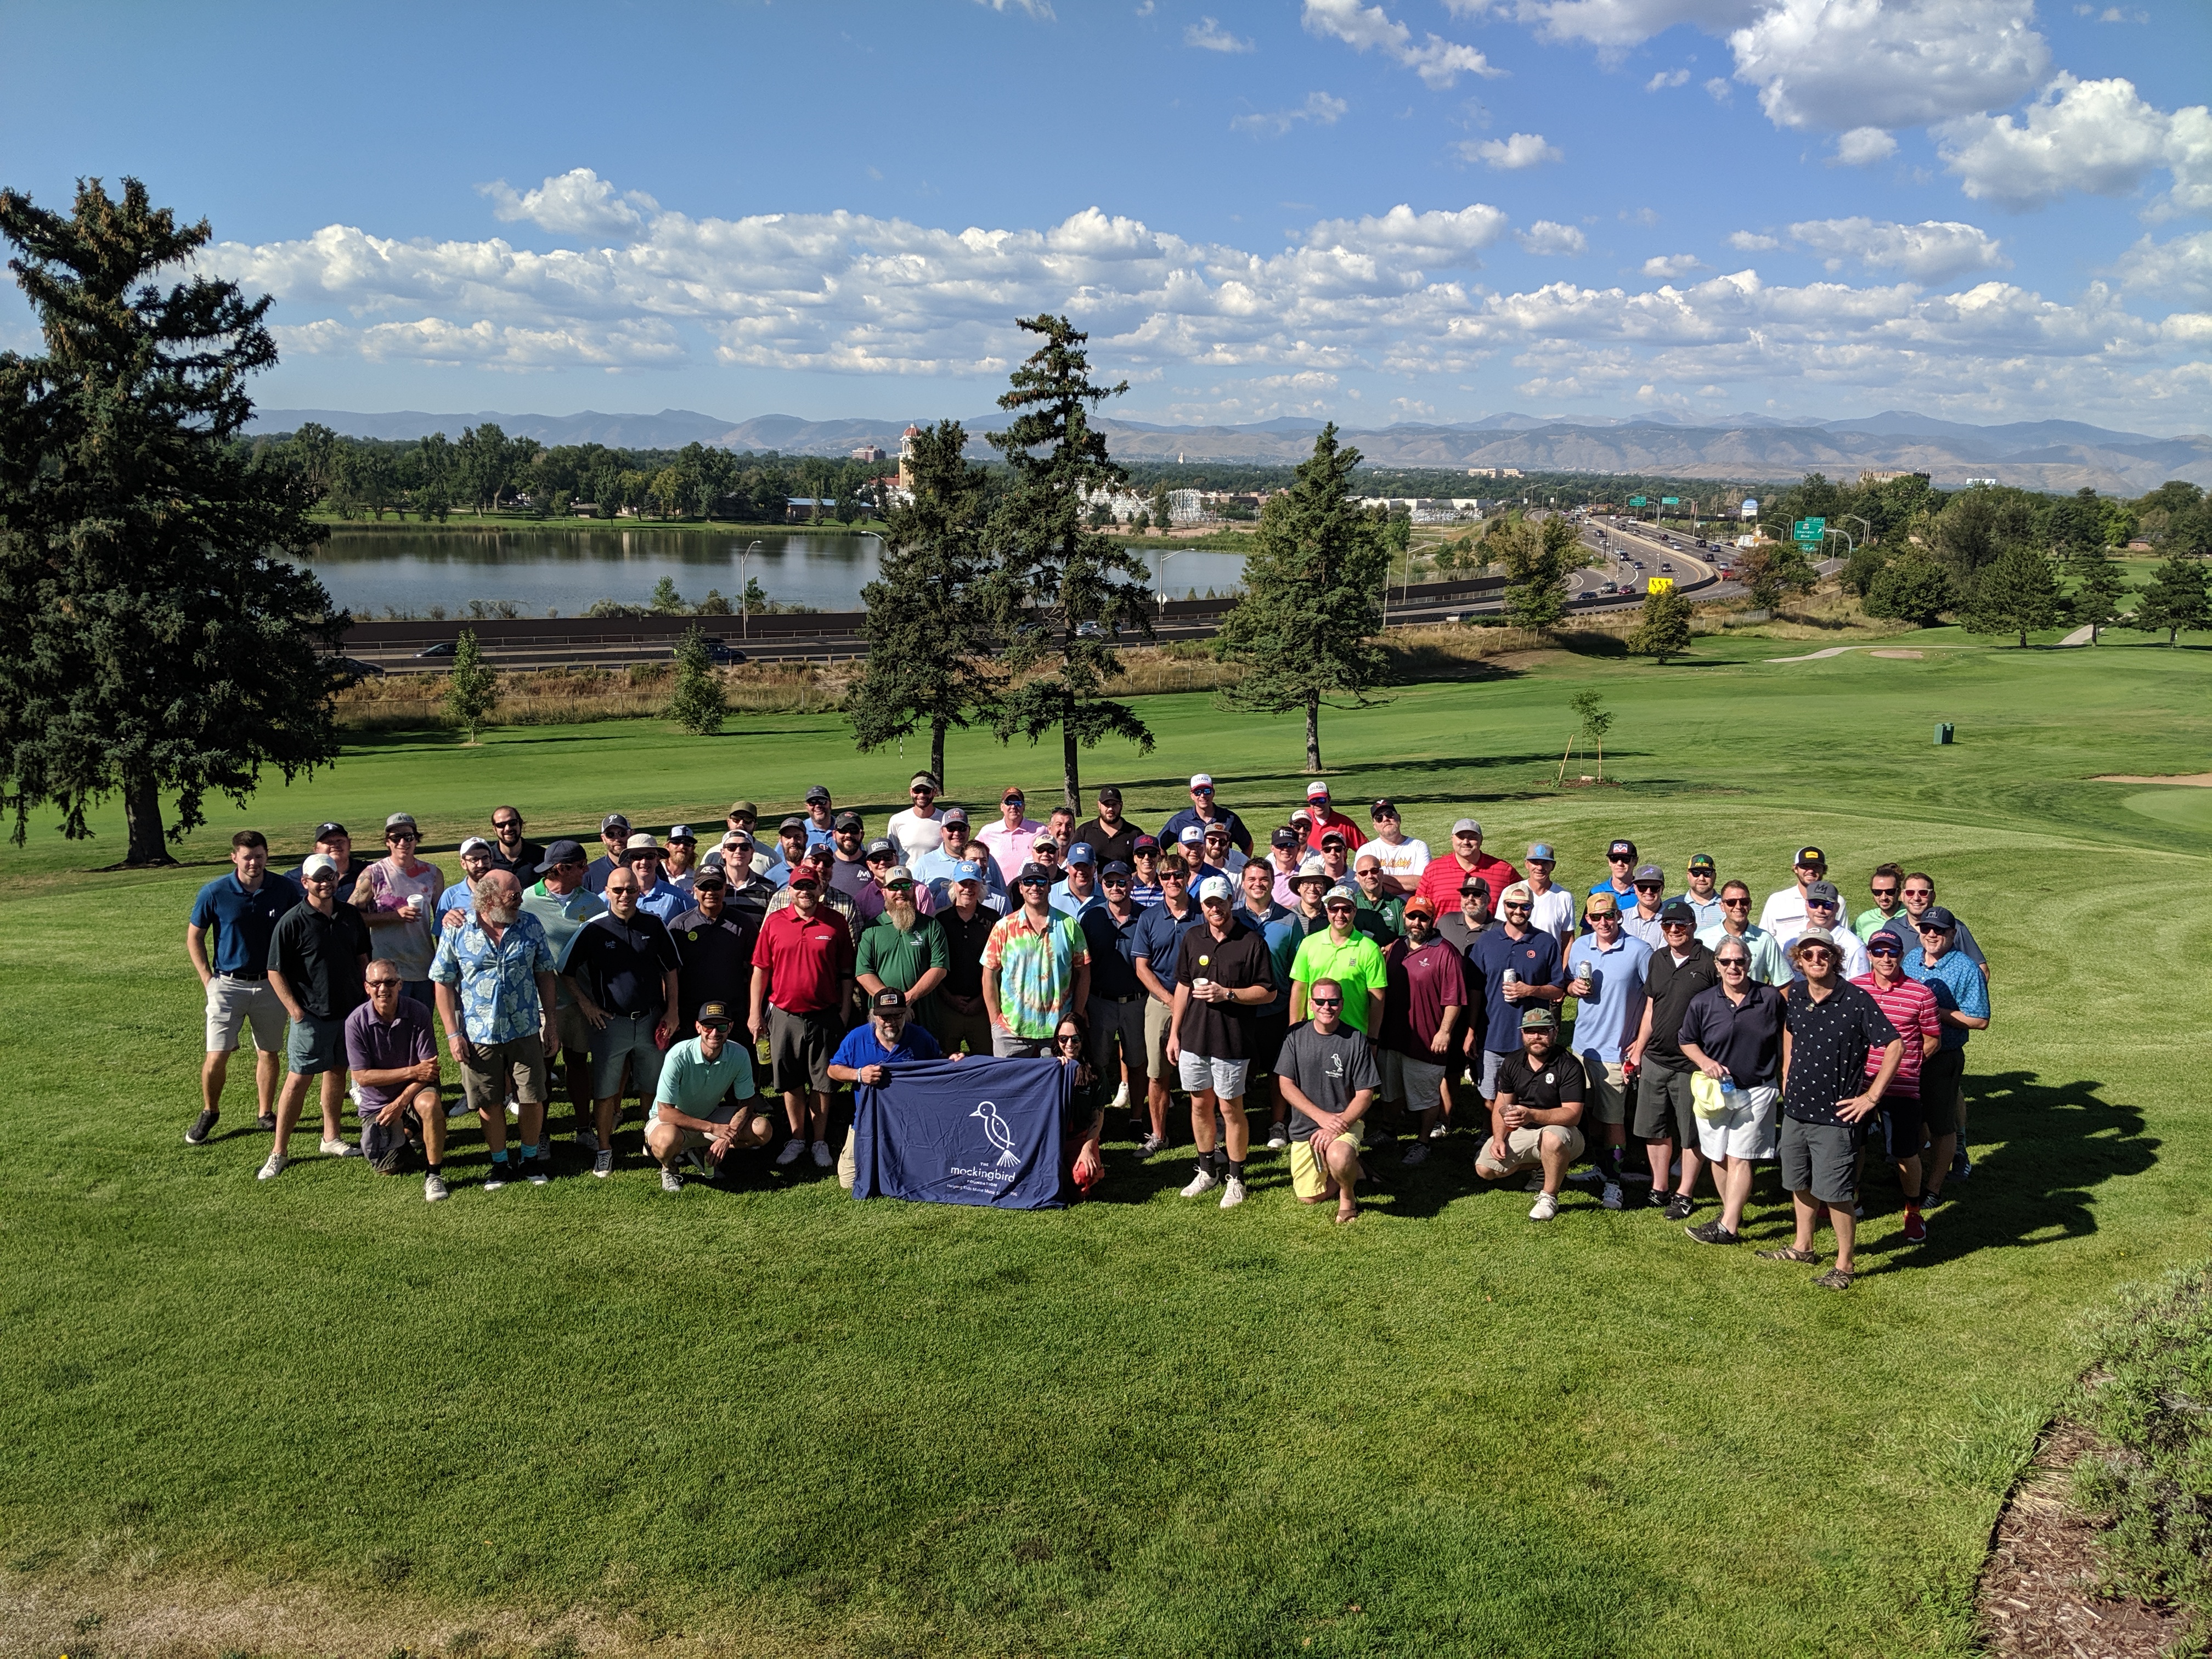 Players in the 4th Runaway Open, 8/31/19